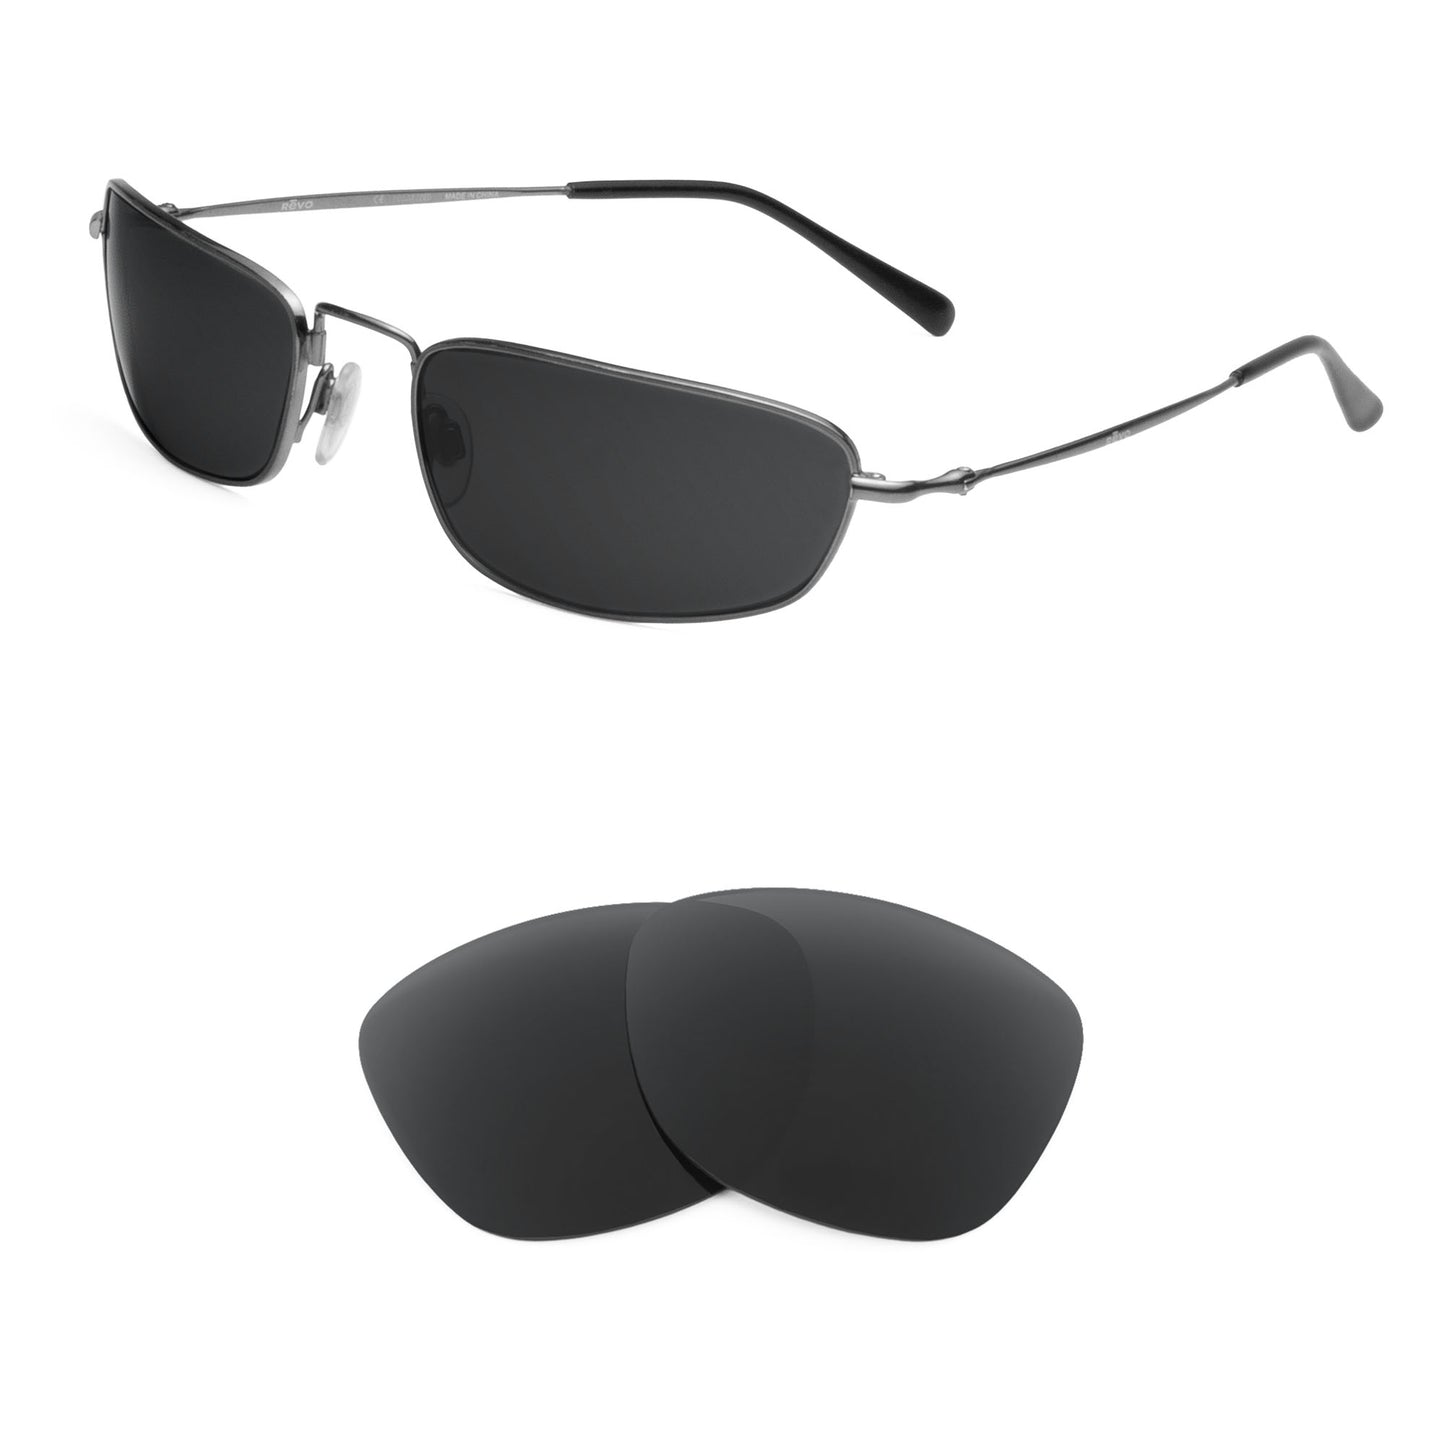 Revo Zinger sunglasses with replacement lenses